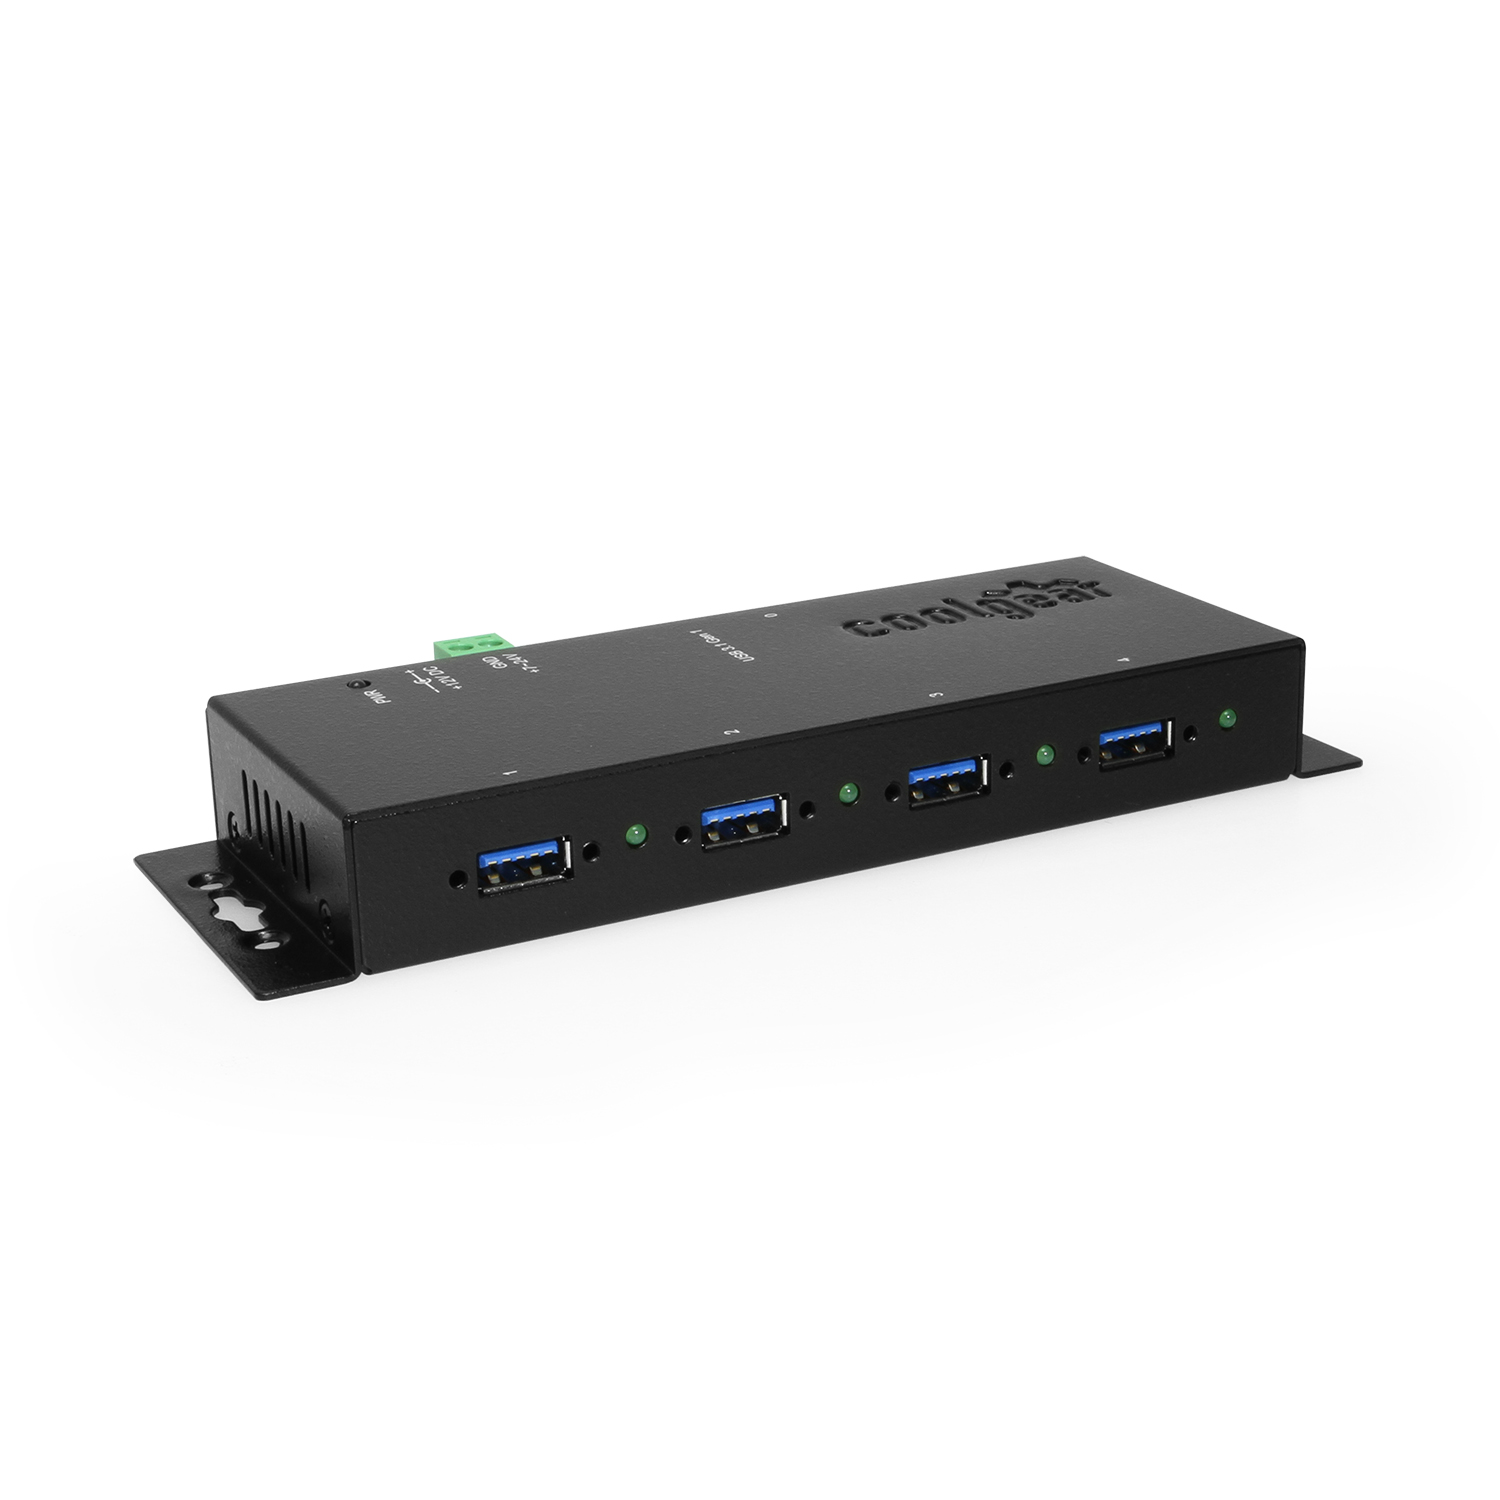 StarTech.com 4 Port USB 3.0 Hub SuperSpeed 5Gbps with Fast Charge Portable  USB 3.1/USB 3.2 Gen 1 Type-A Laptop/Desktop Hub, USB Bus Power or Self  Powered for High Performance, Mini/Compact